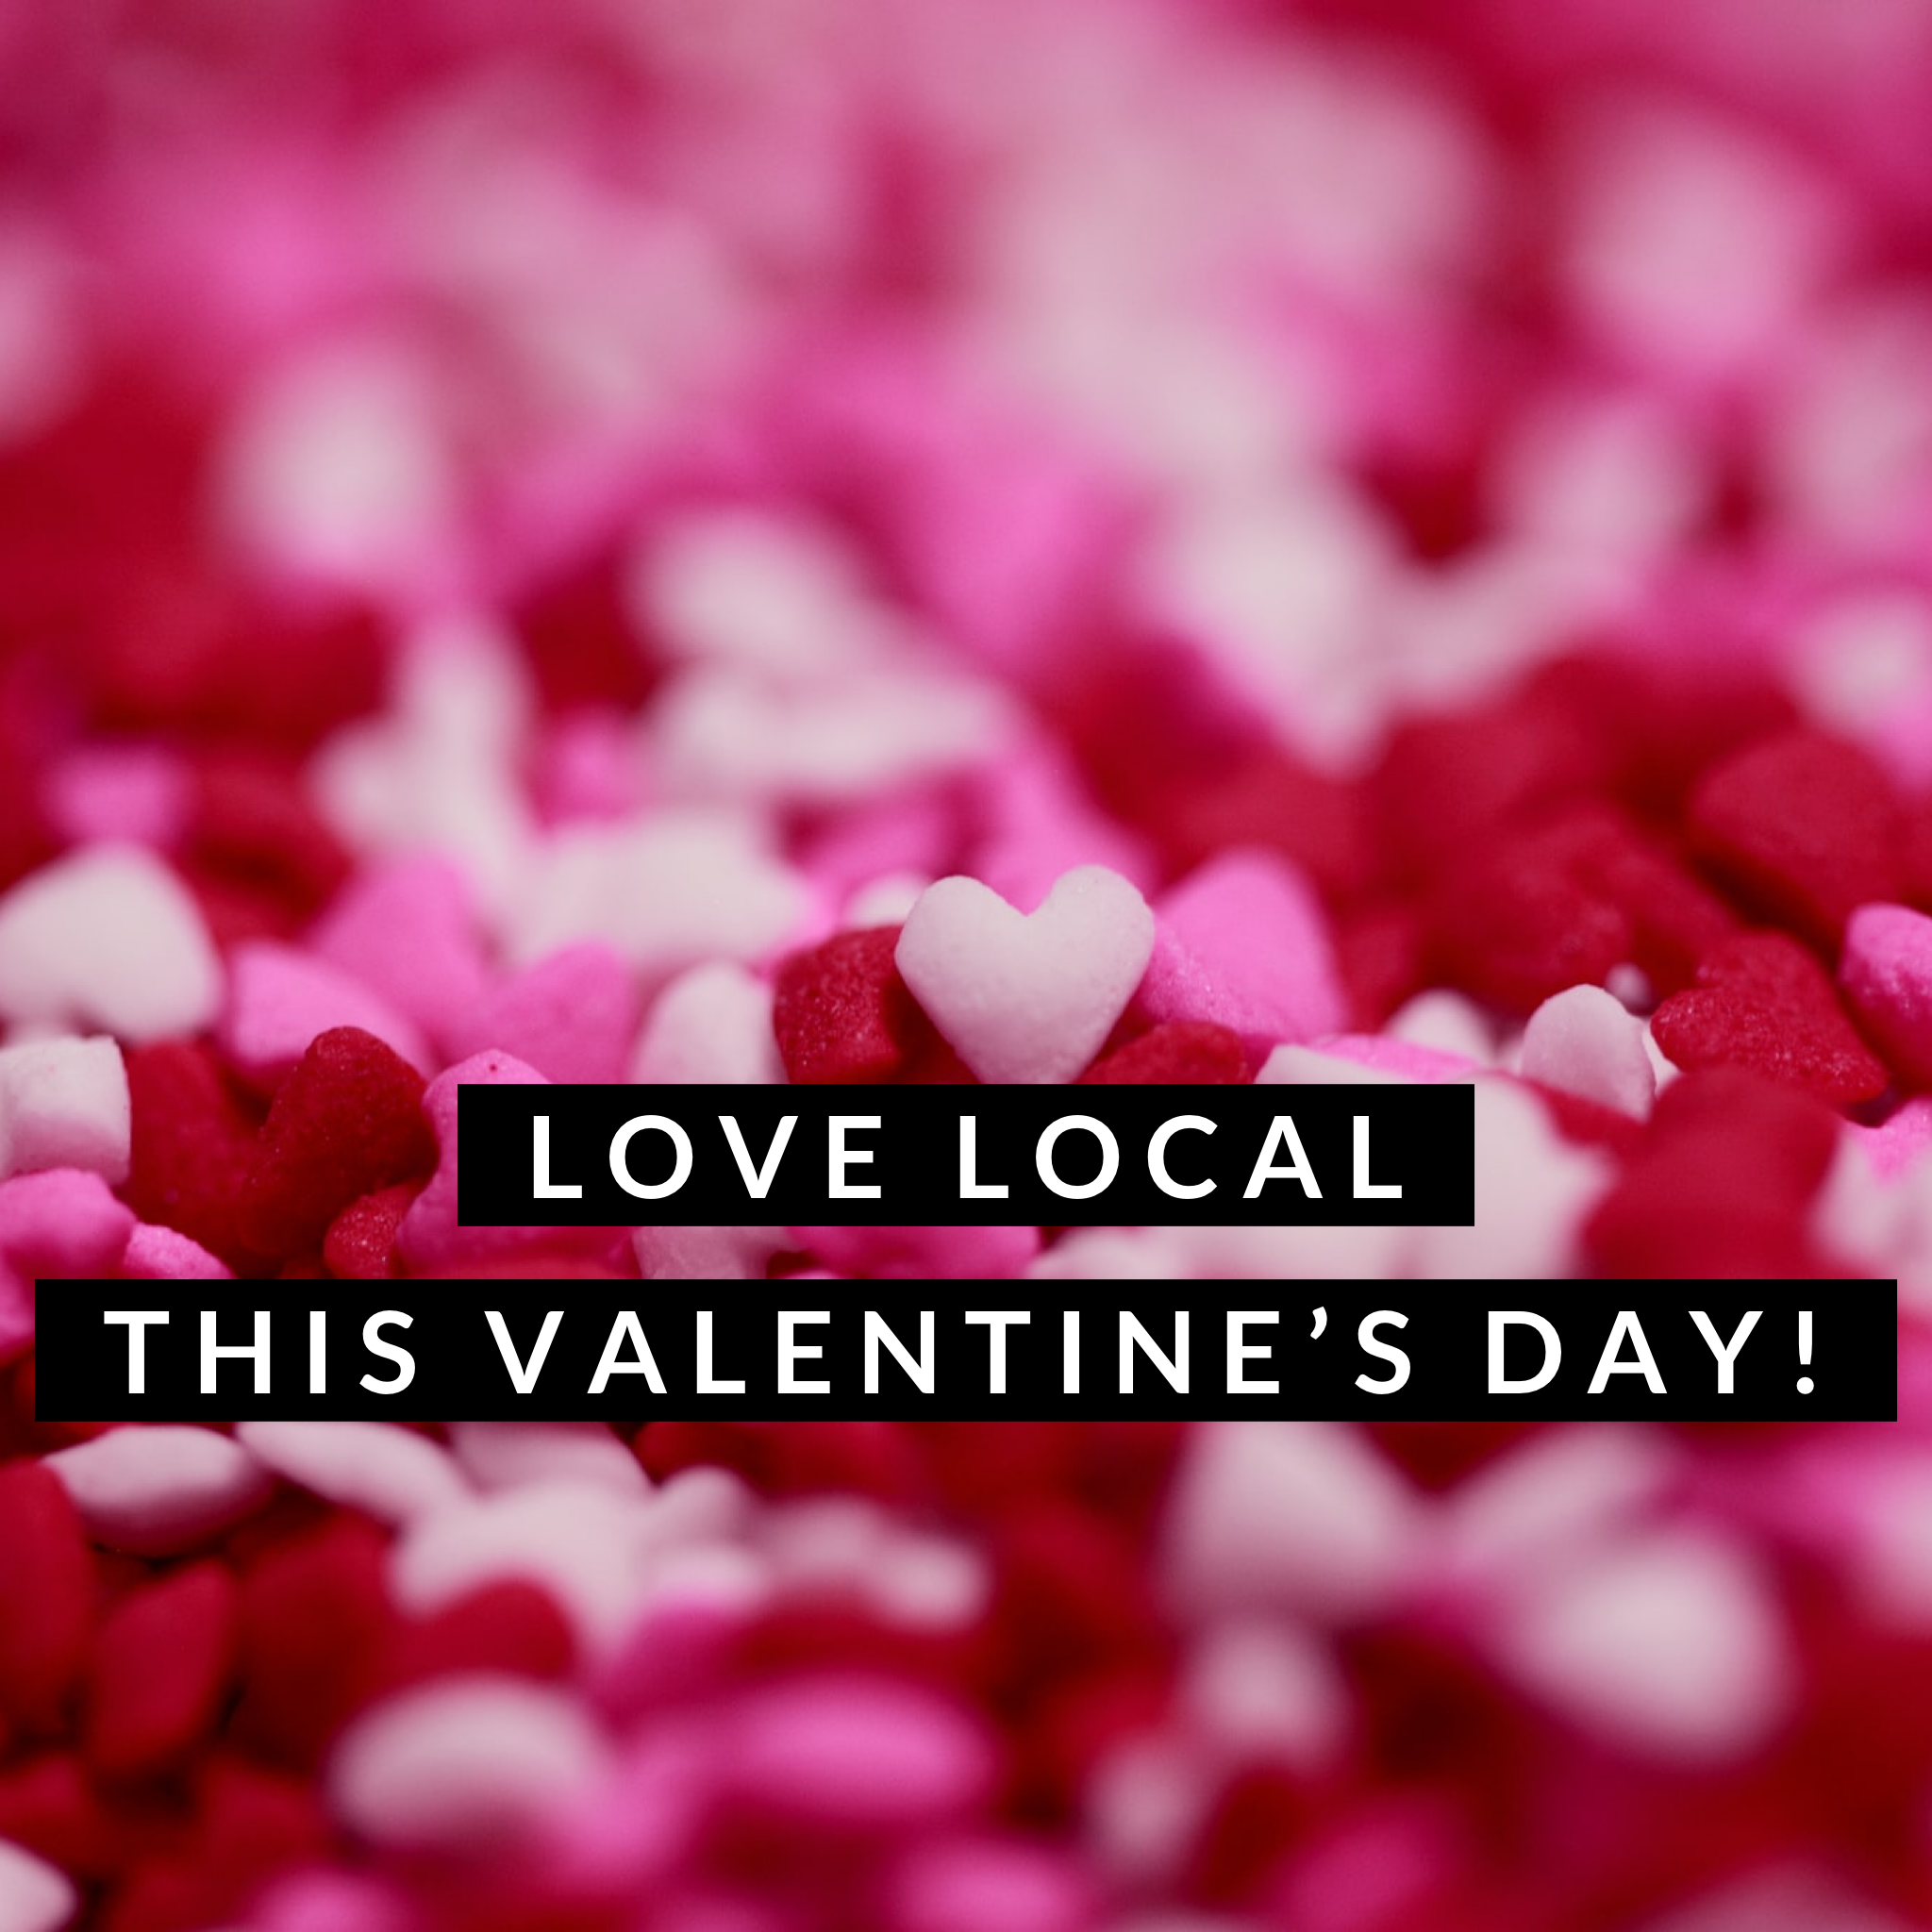 Love Local: Your Valentine’s Day “Sweet Sheet”